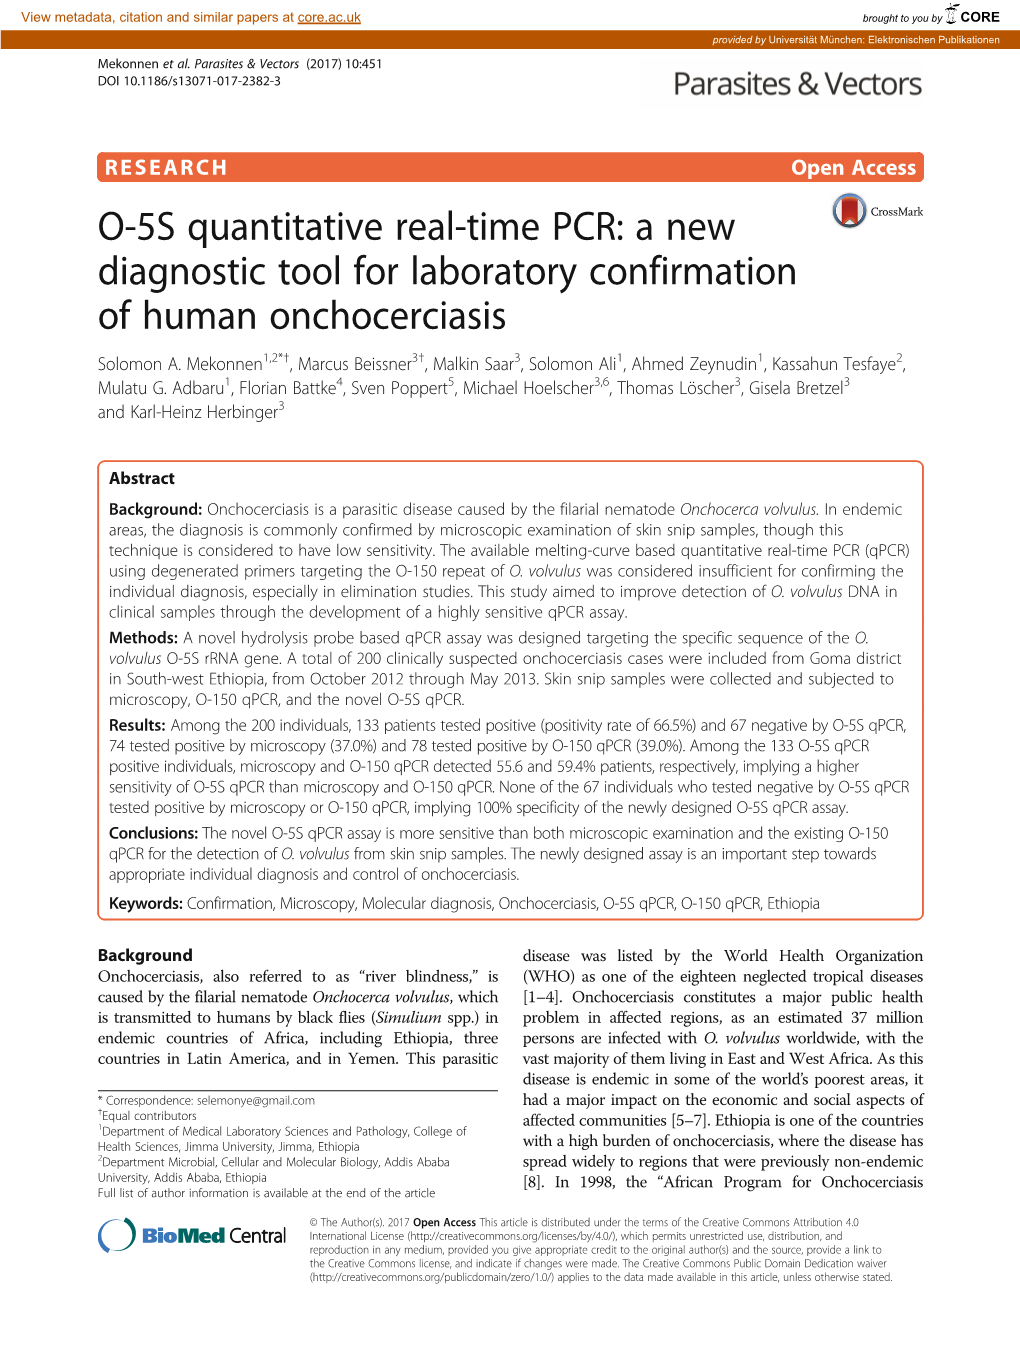 O-5S Quantitative Real-Time PCR: a New Diagnostic Tool for Laboratory Confirmation of Human Onchocerciasis Solomon A